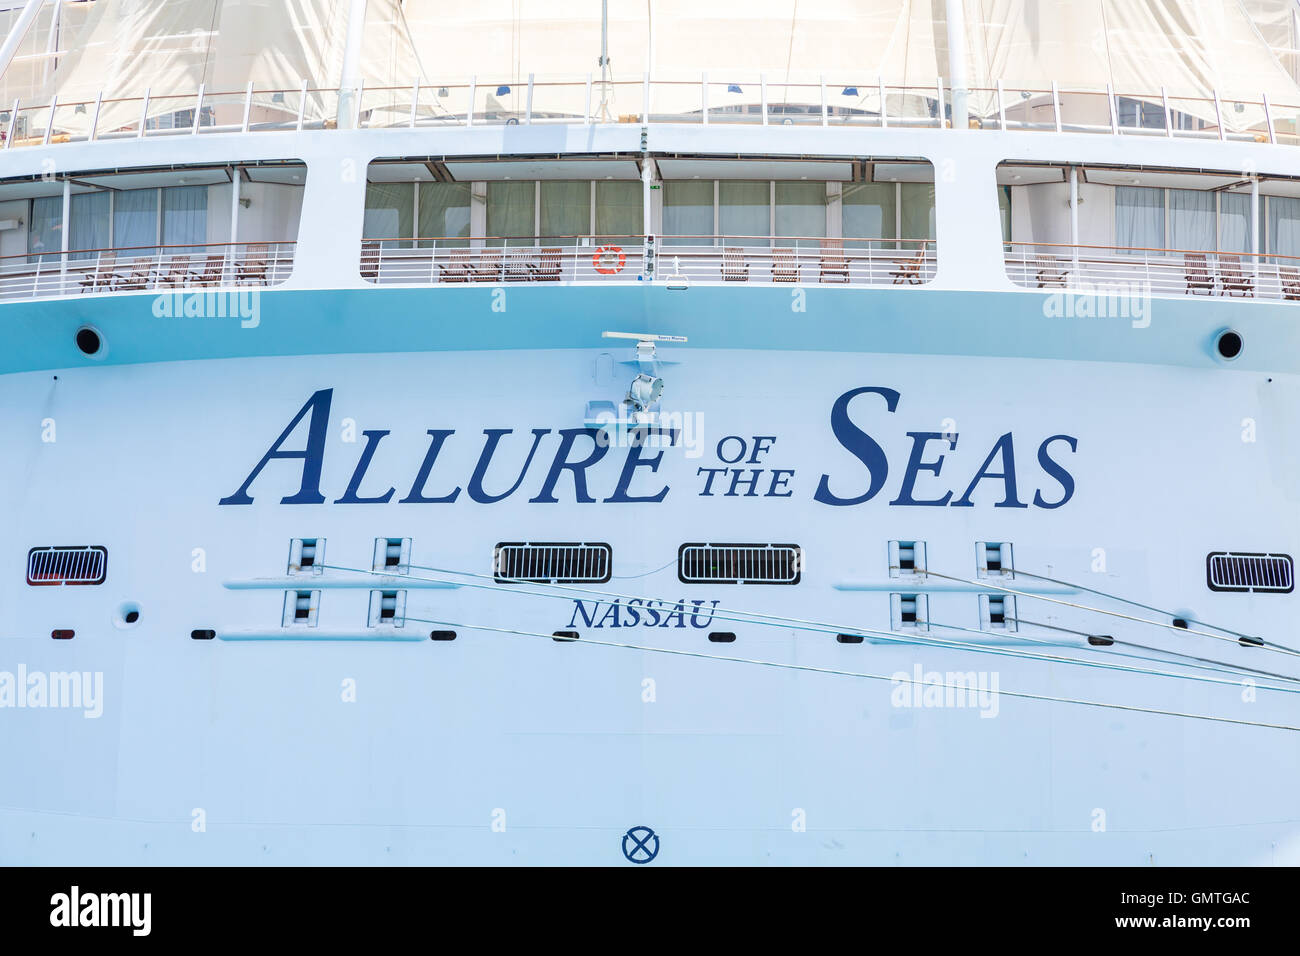 Allure of the Sea Docked in St Martin in the Caribbean Stock Photo